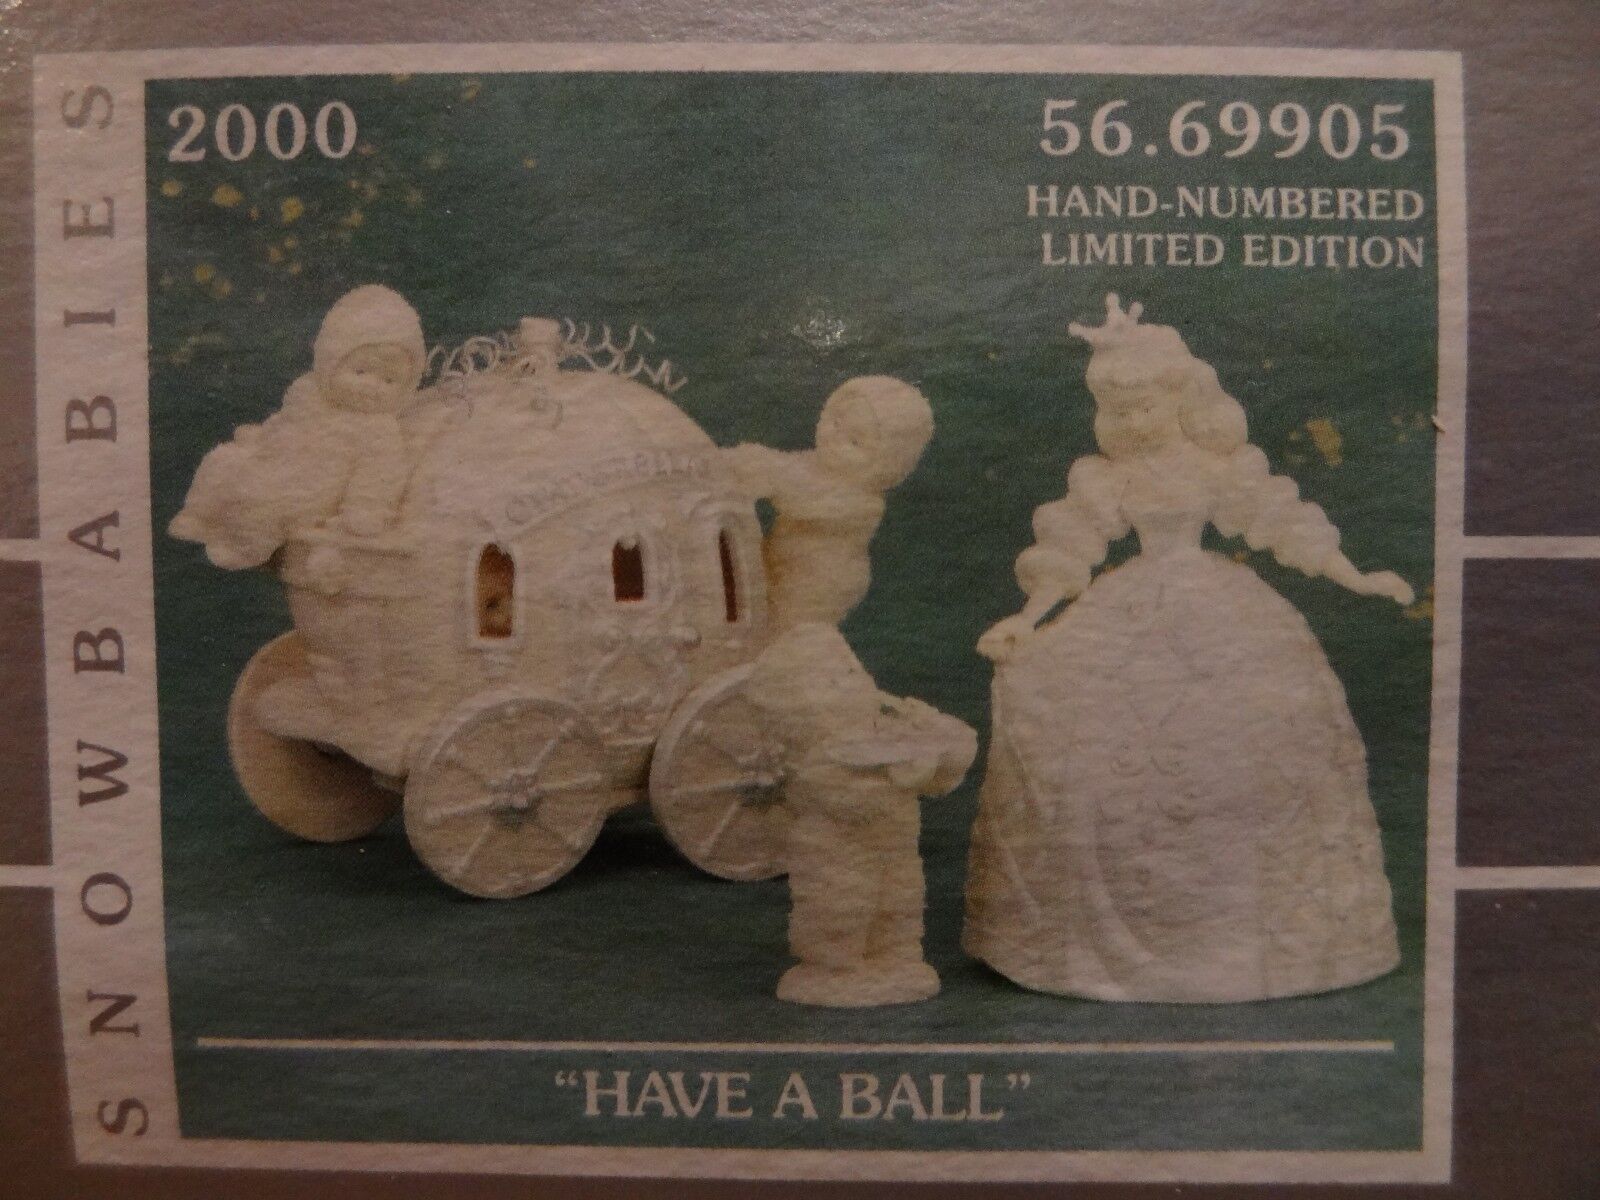 NEW Dept56 69905 Snowbabies Disney Have A Ball Cinderella Carriage Hand Numbered